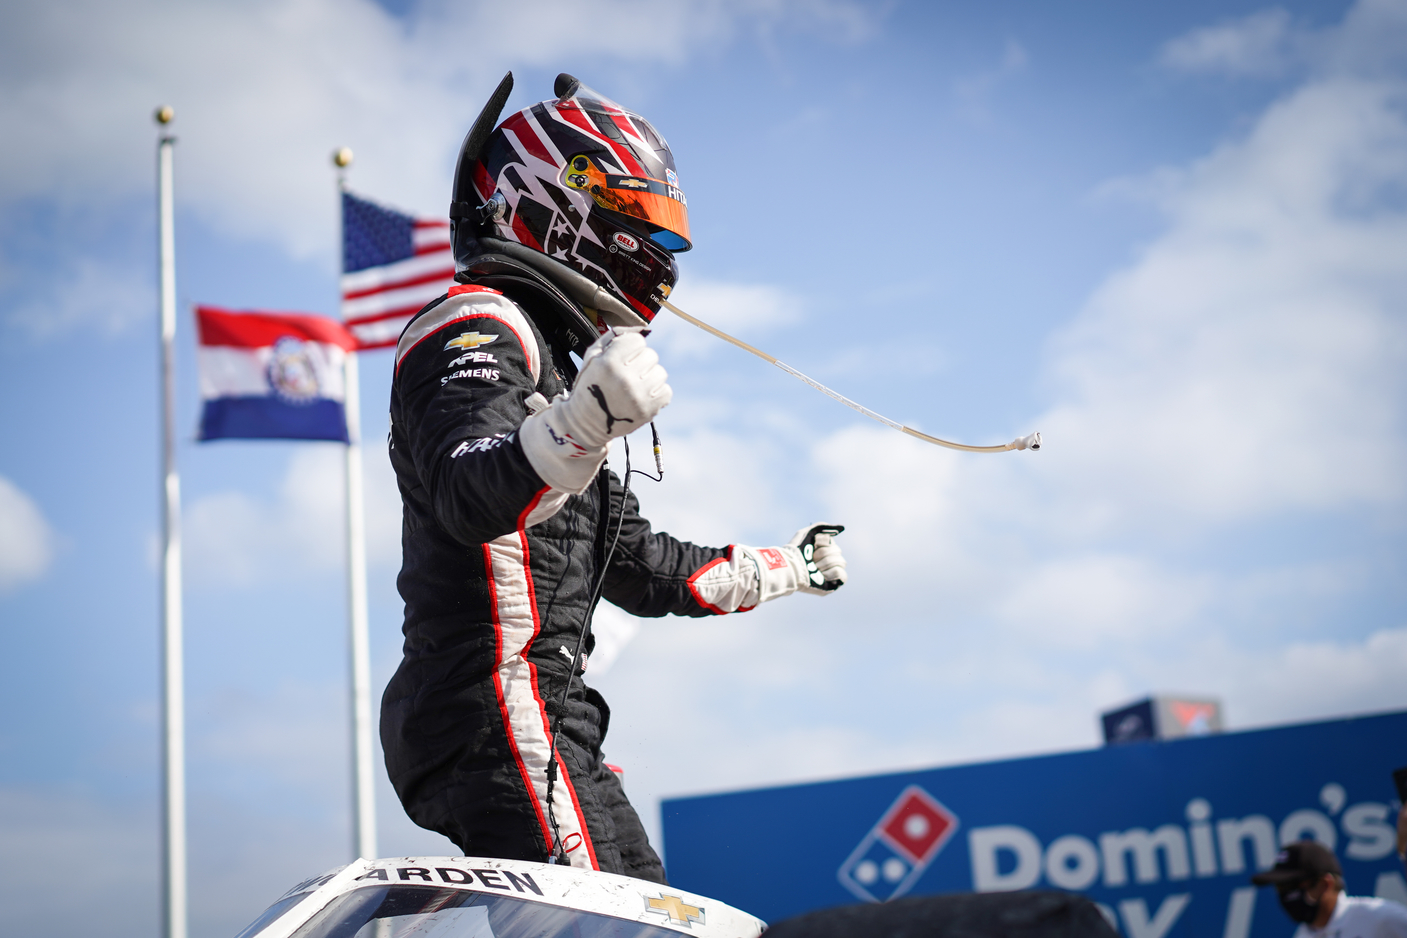 Catching Up with Josef Newgarden Image